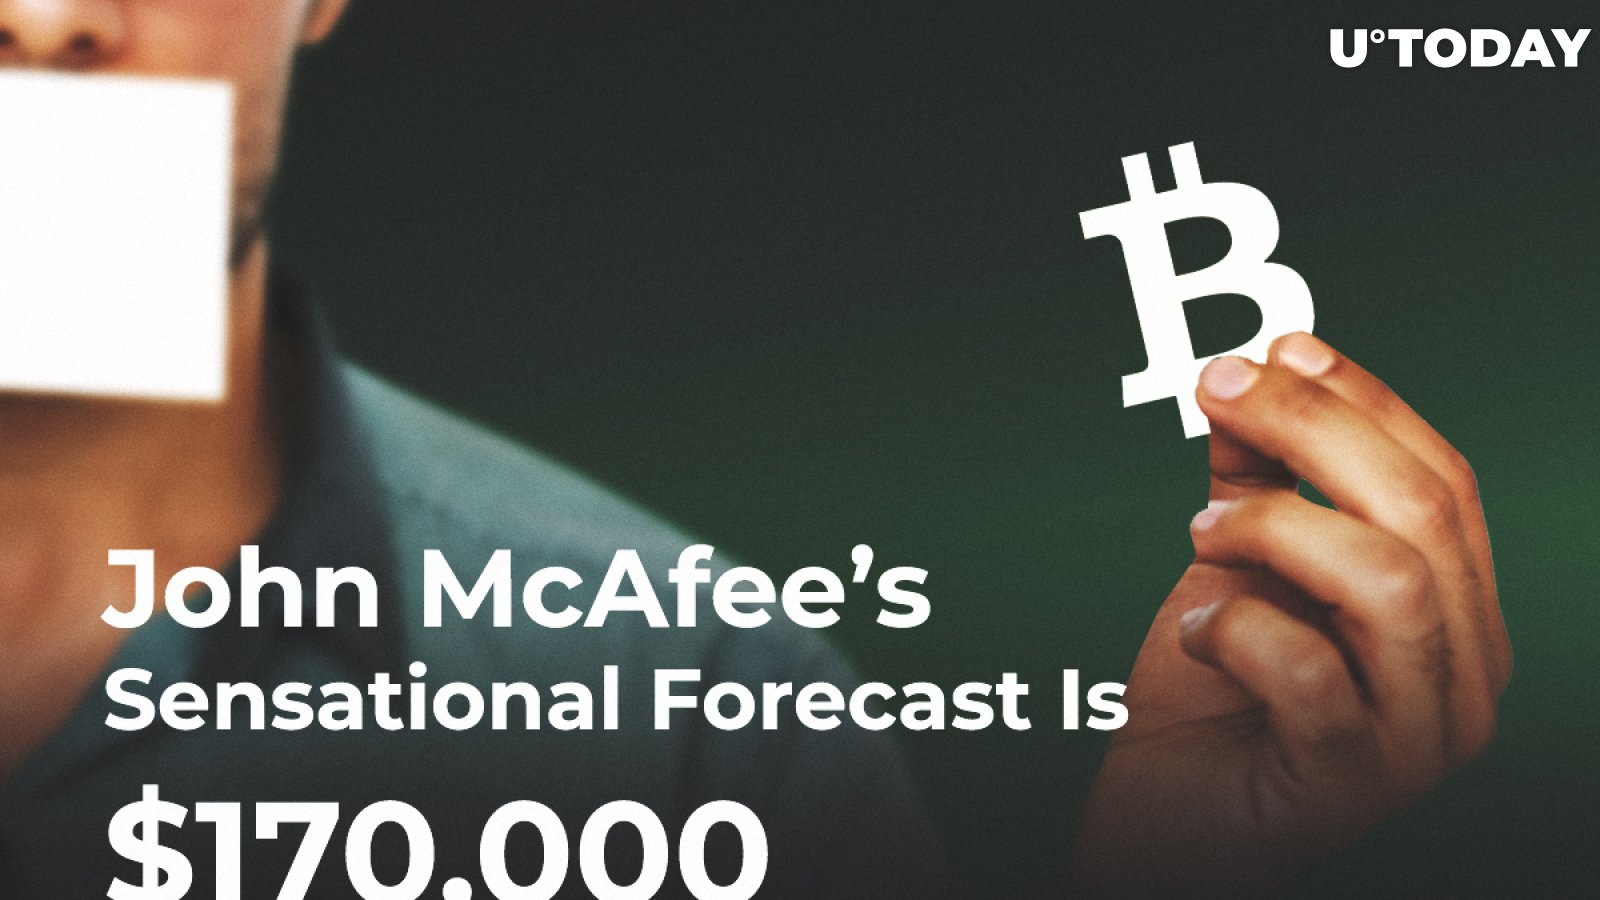 New! Bitcoin Price Prediction: John McAfee’s Sensational Forecast Is $170,000 By the End of 2019 